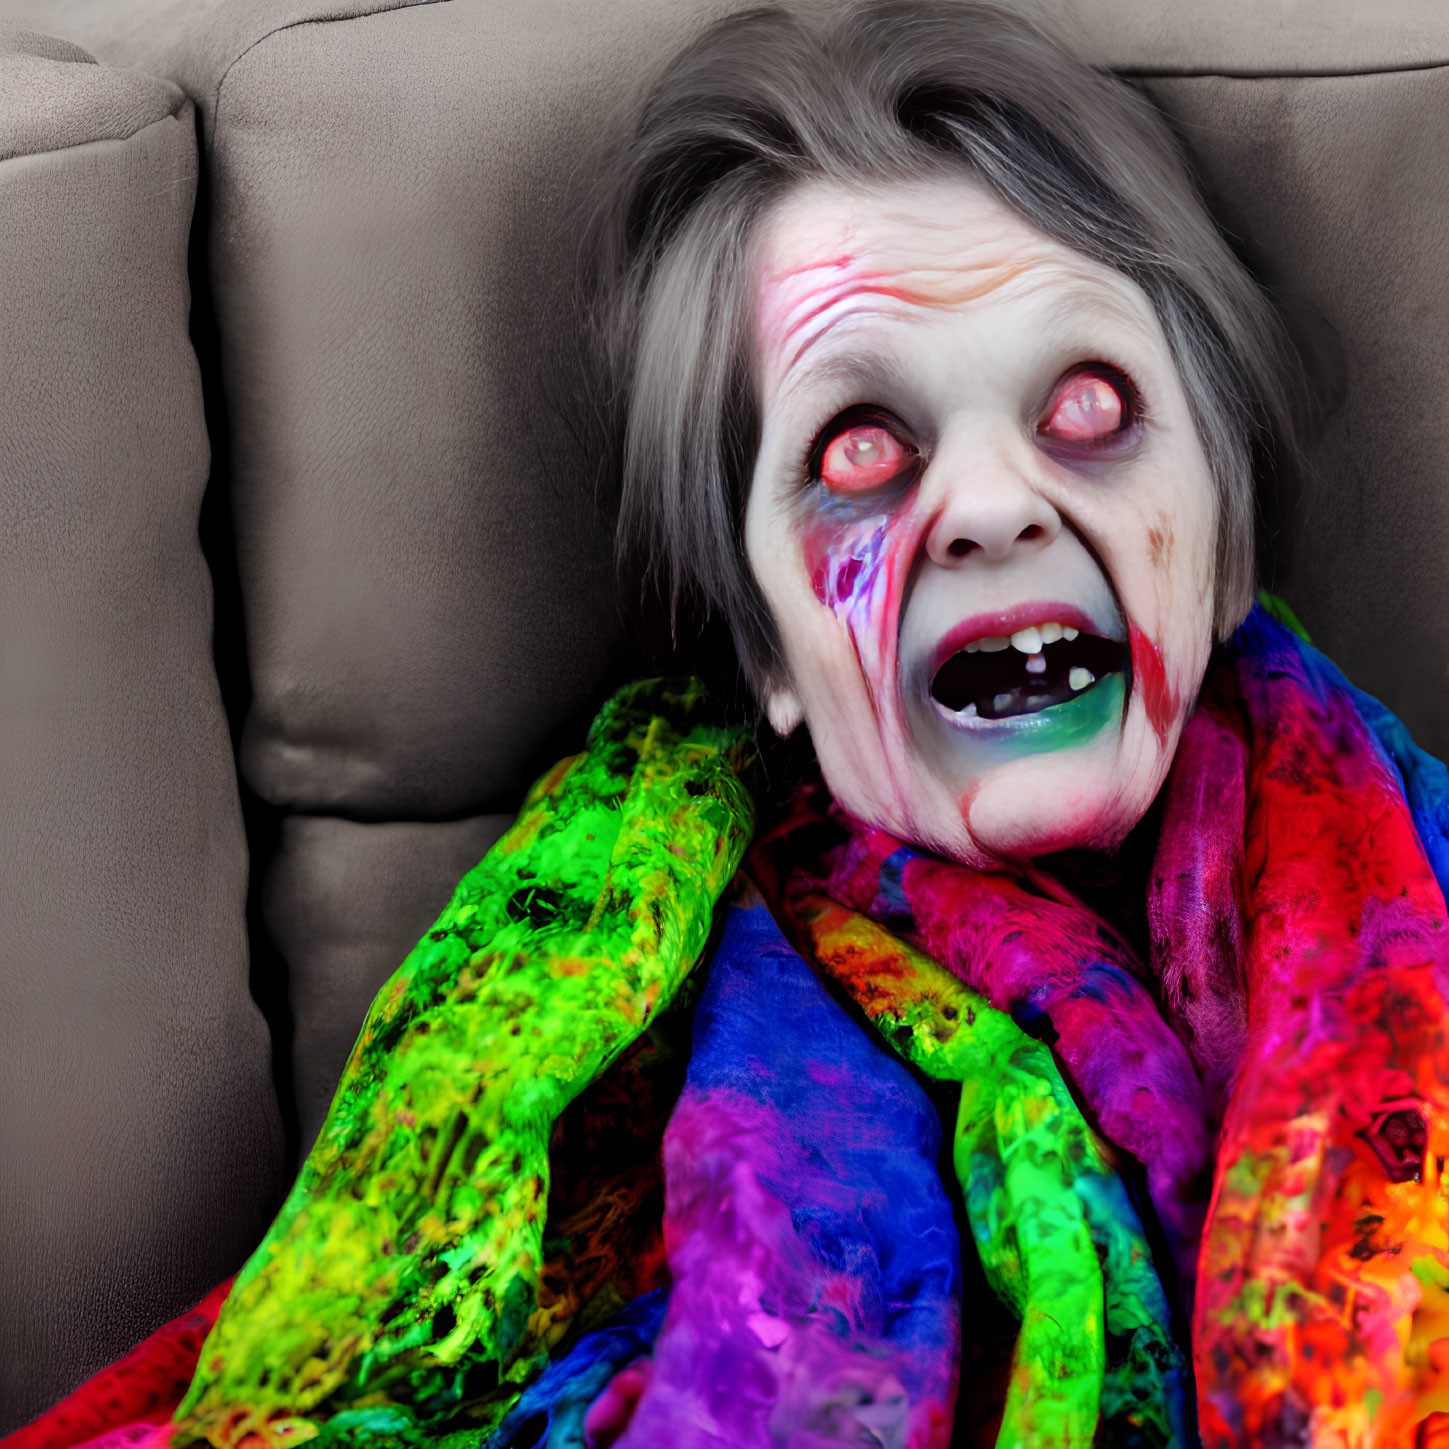 Person with zombie makeup and red eyes sitting against a sofa in colorful scarf